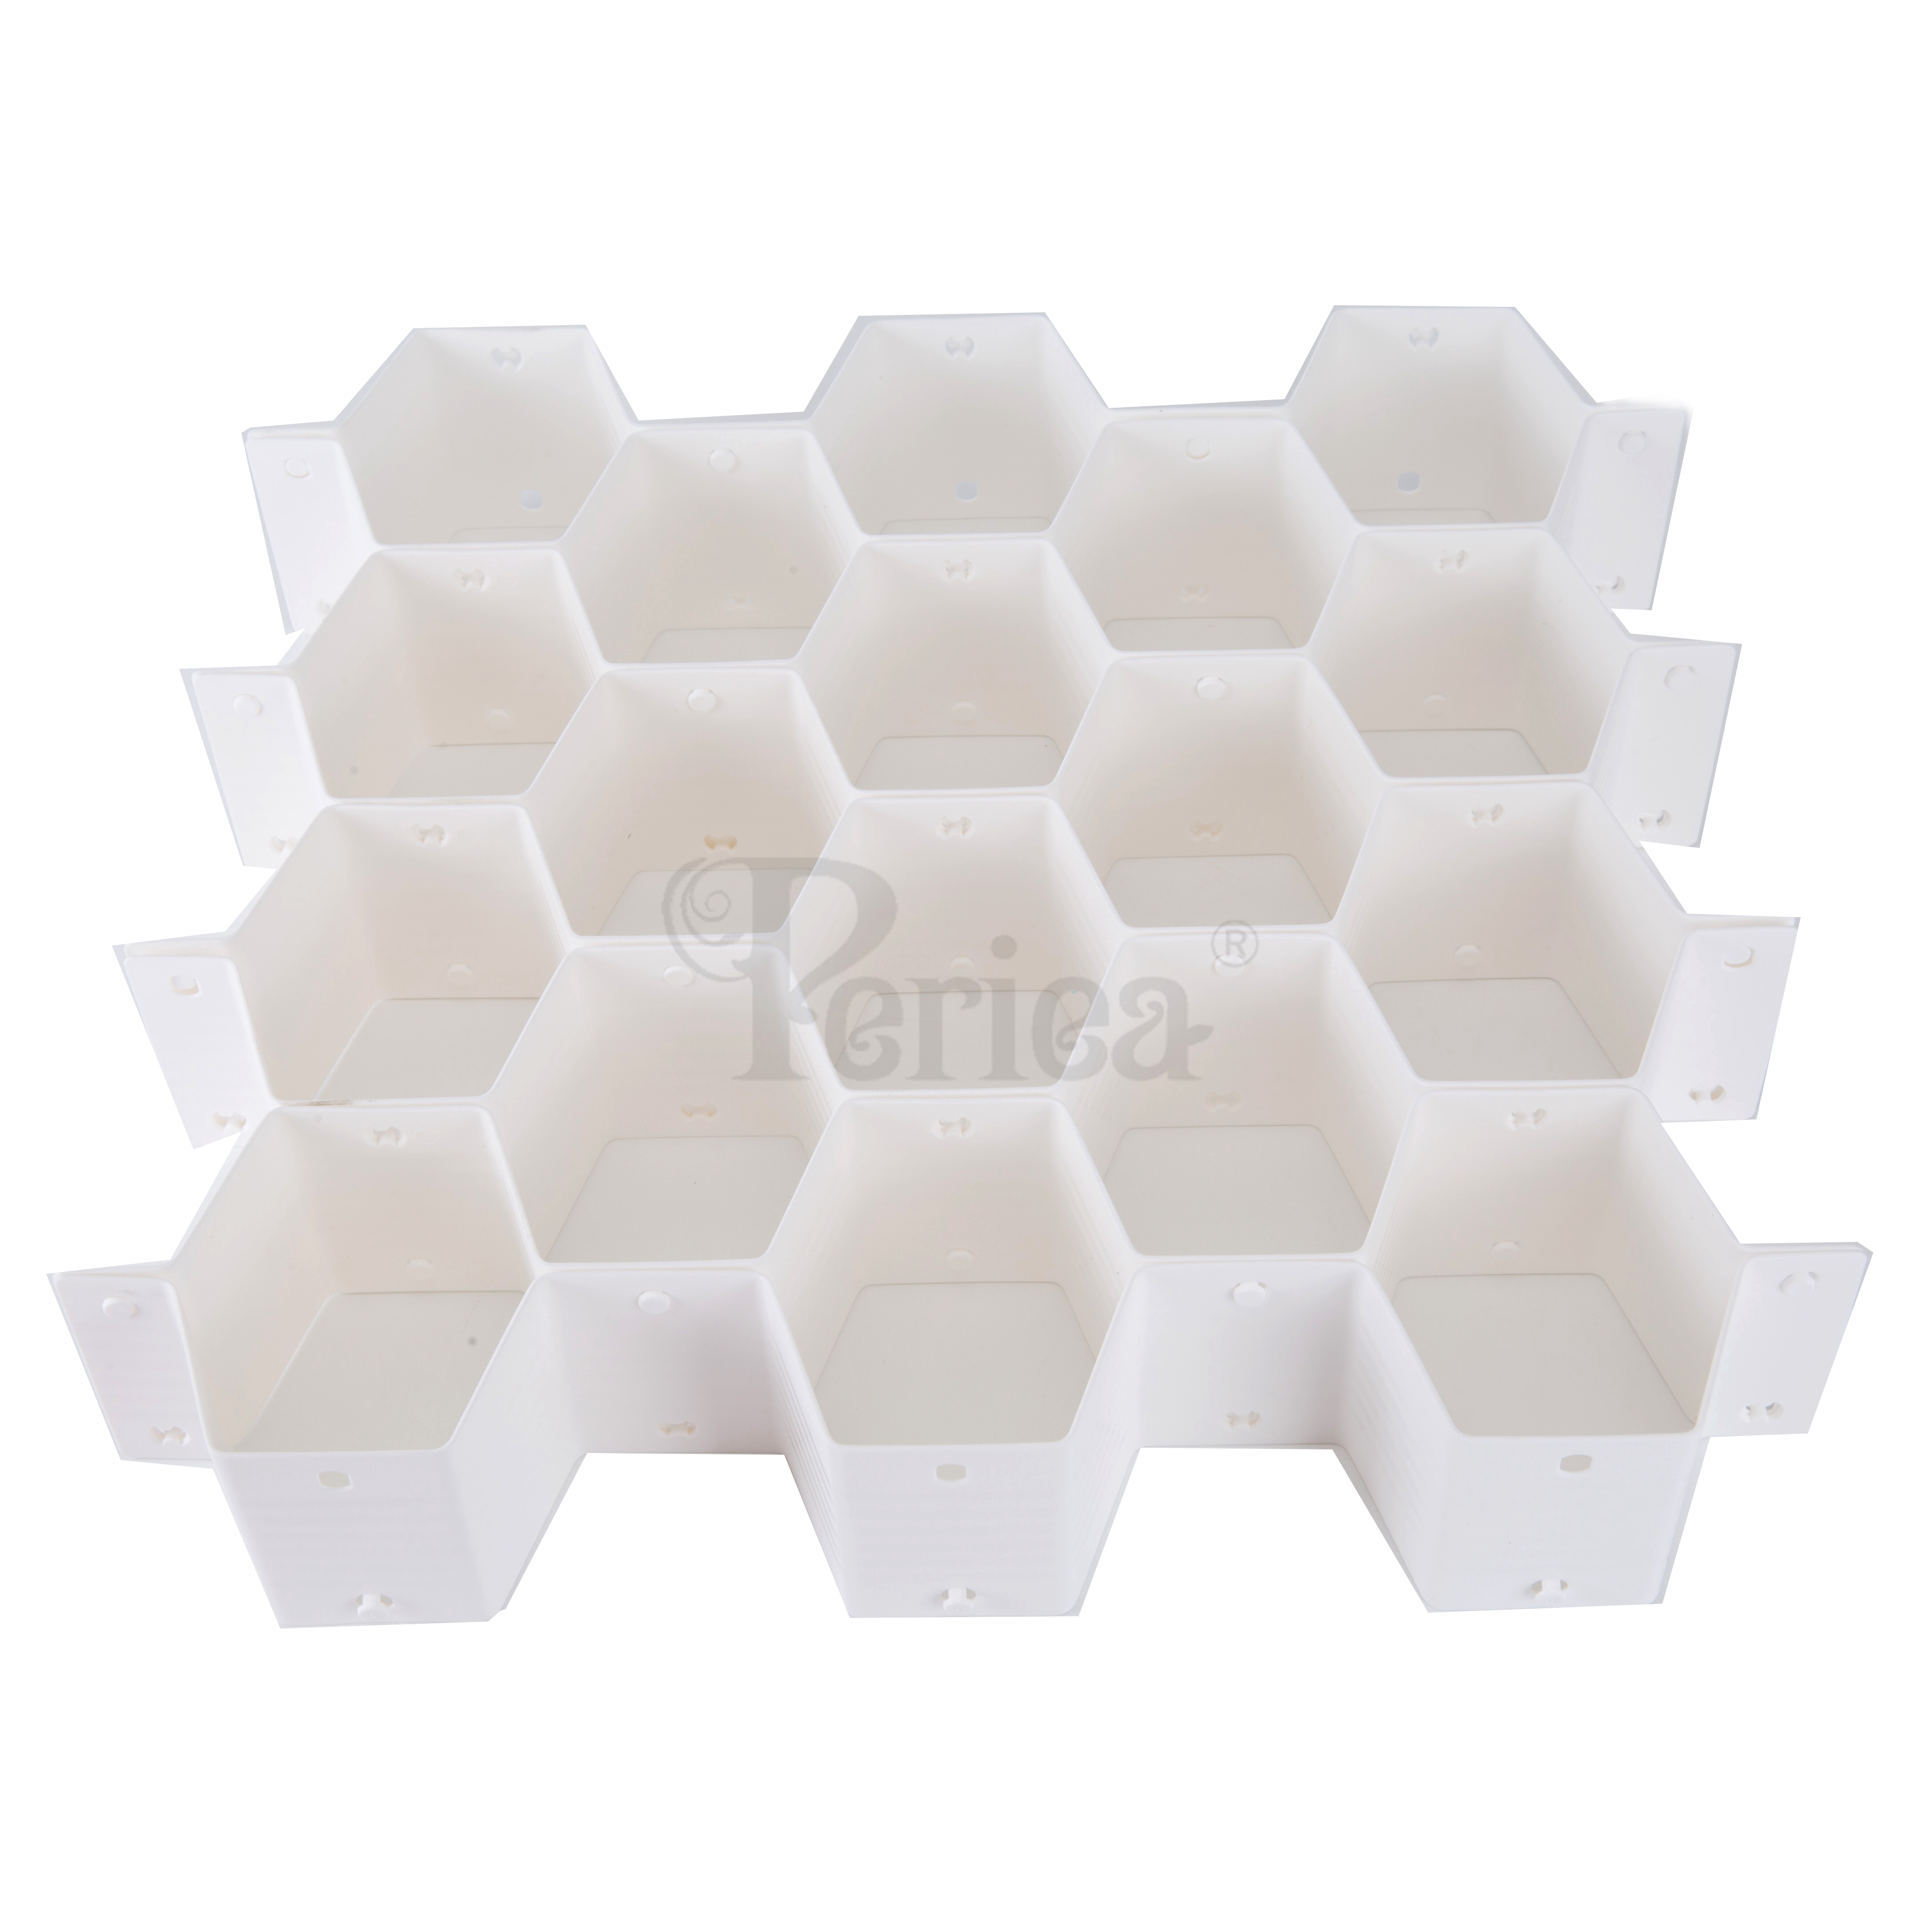 Details about   Periea Drawer Draw Organiser Tidy Storage 18 Compartments Honeycomb Pink White